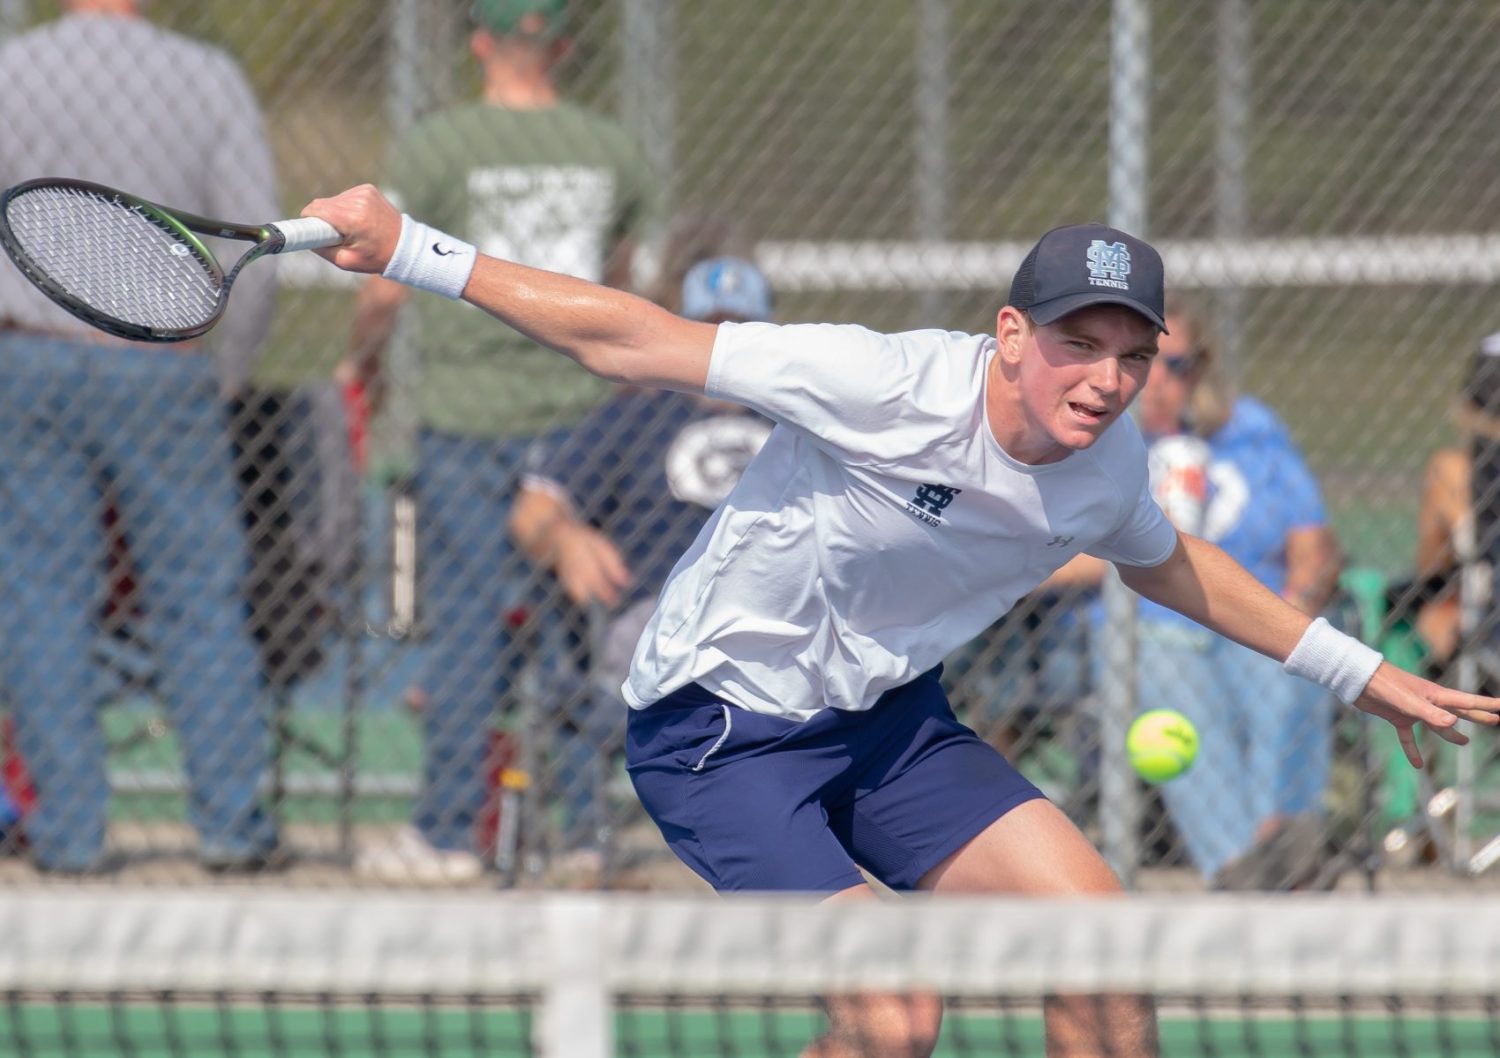 Hackney-led Mona Shores wins GMAA city tennis title for fifth straight year